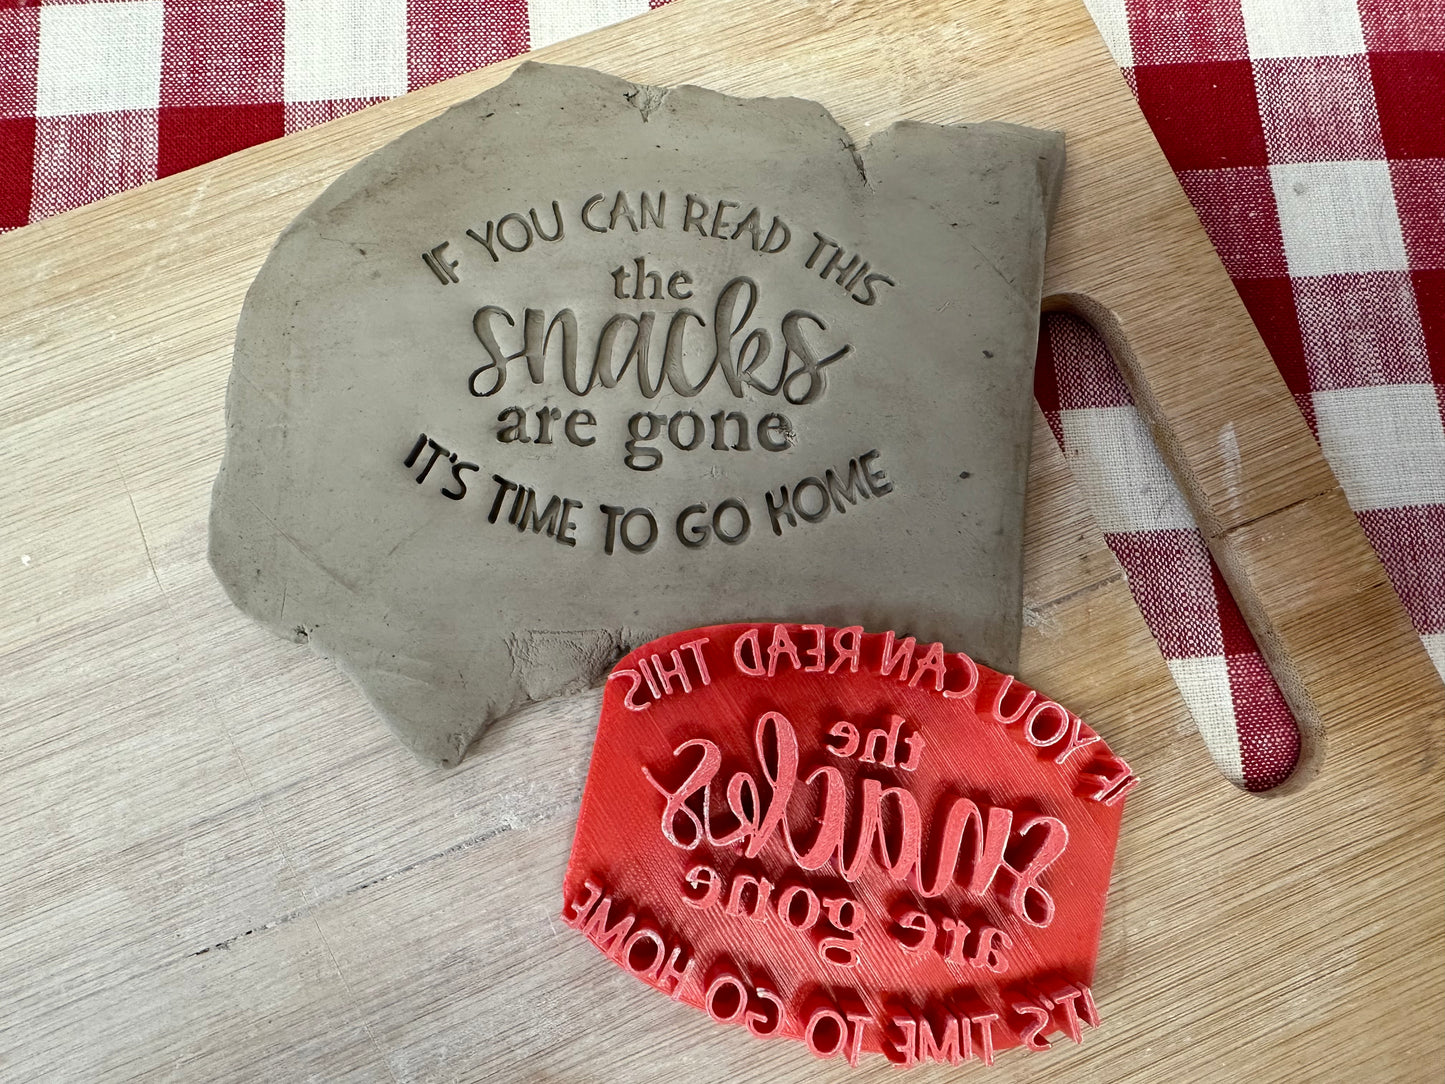 "If You're Reading This the Snacks are Gone It's Time to go Home" word pottery stamp - plastic 3D printed, multiple sizes